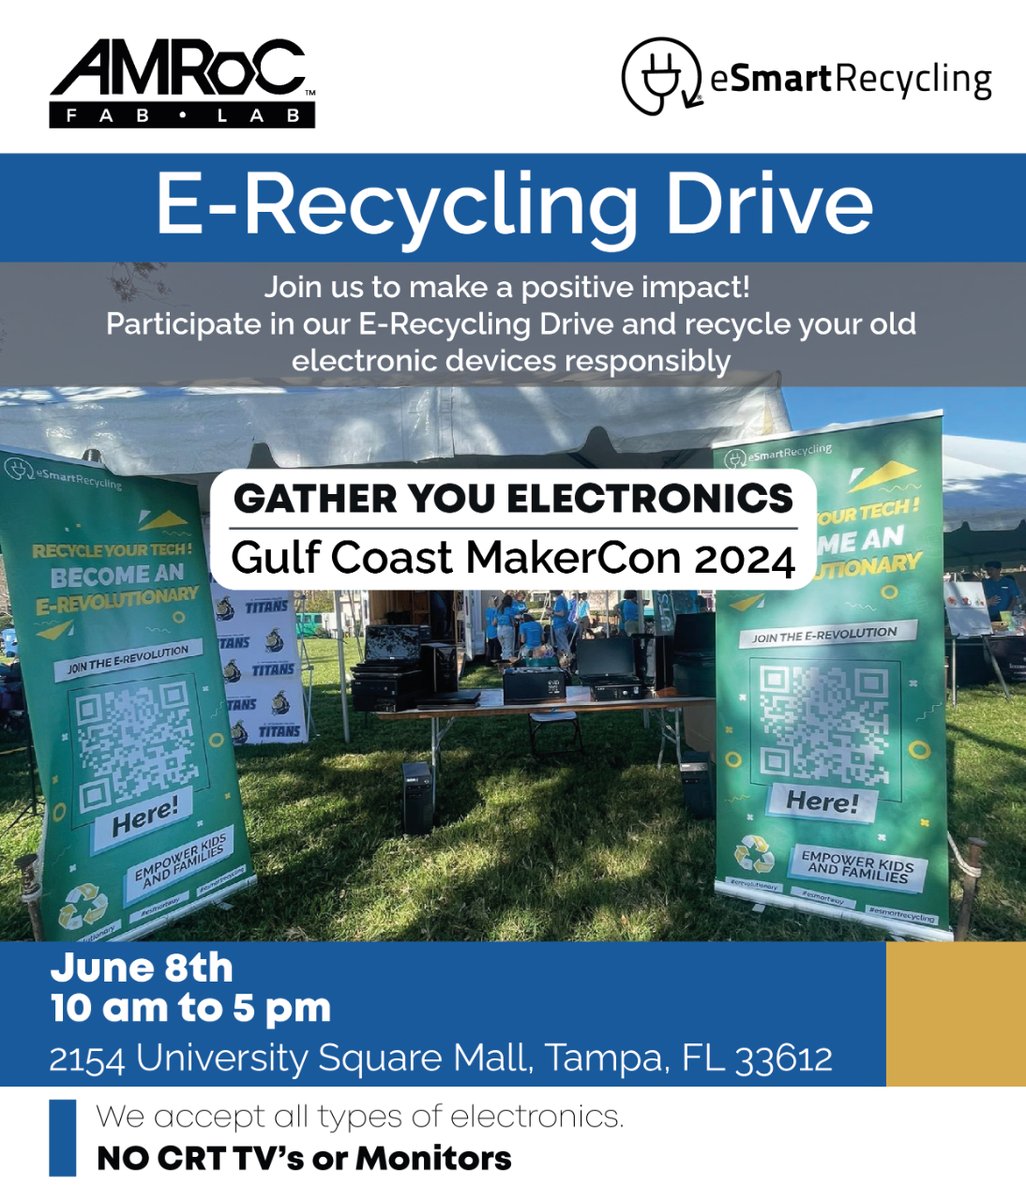 🎉 Have electronics gathering dust? Please bring them to Gulf Coast MakerCon 2024 on June 8th and recycle them with us. Help the planet and support educational causes! 🌱💚 #responsiblerecycling #esmartrecycling